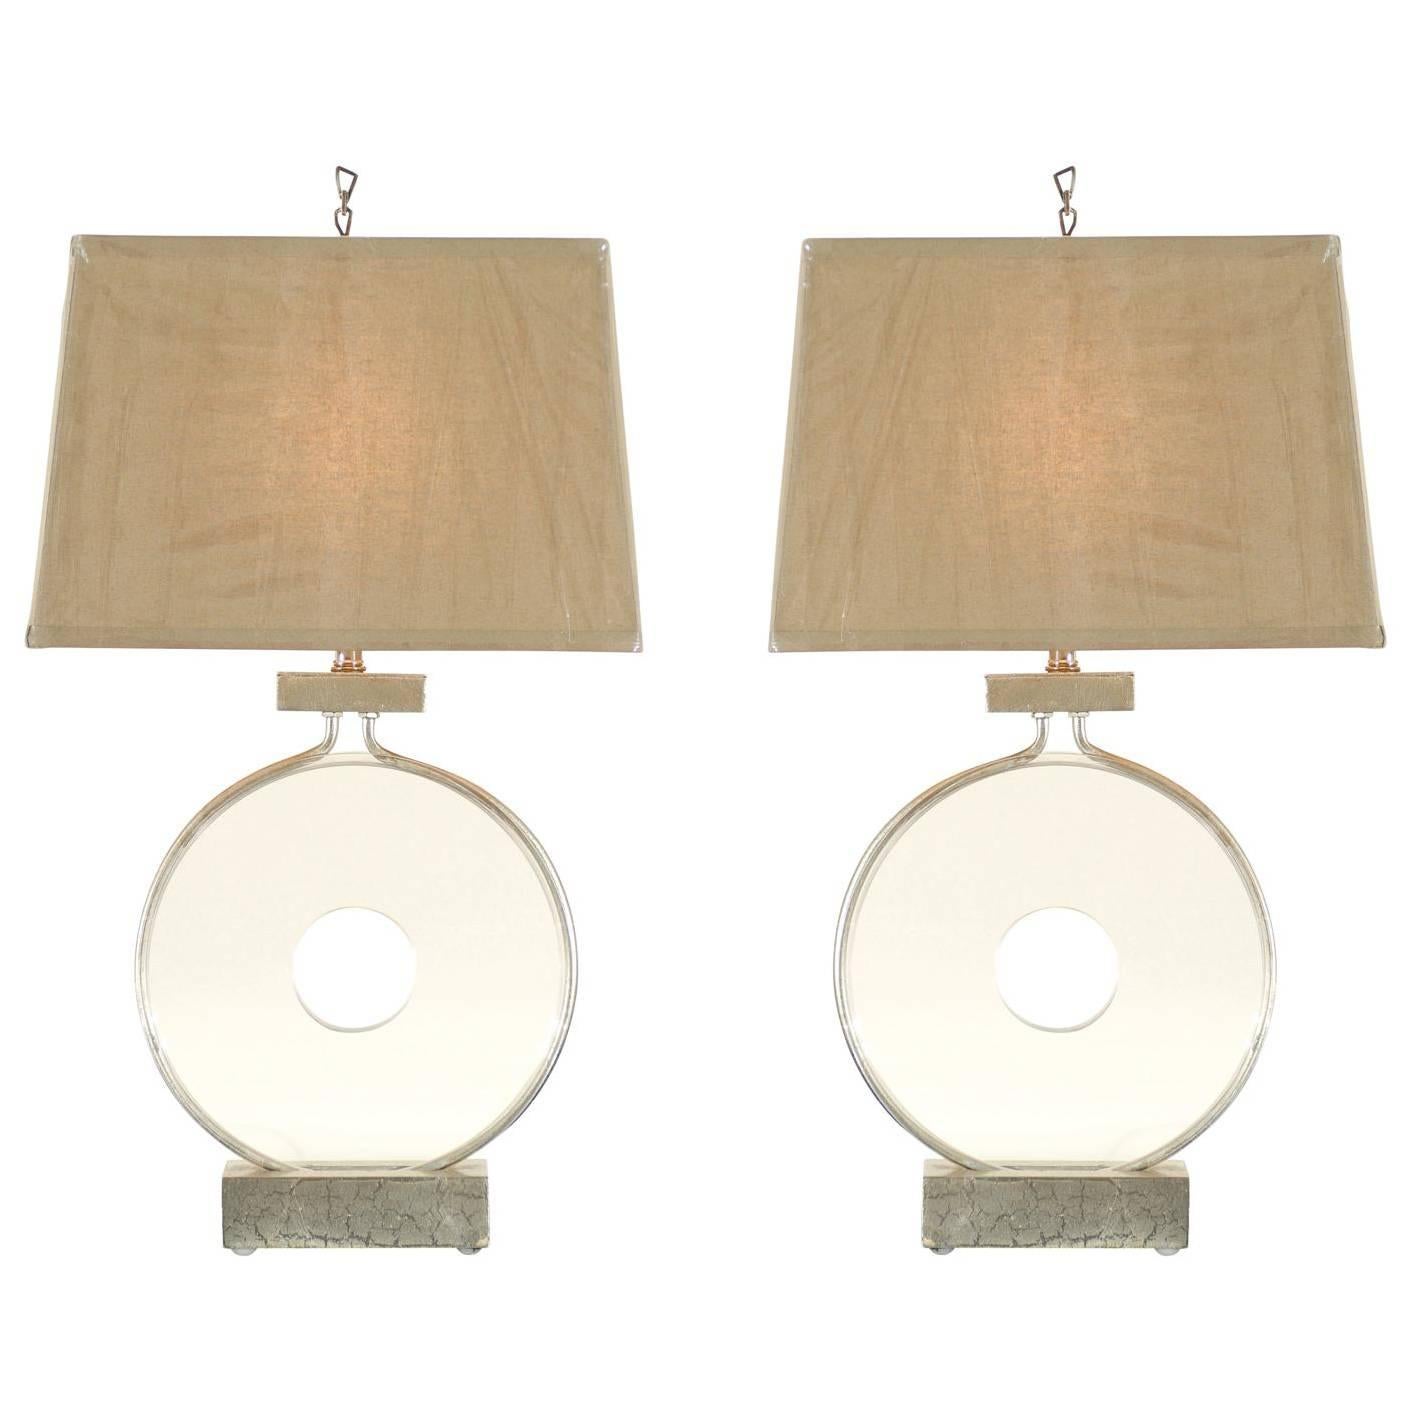 Restored Pair of Stylish Vintage Lucite Disk Lamps For Sale